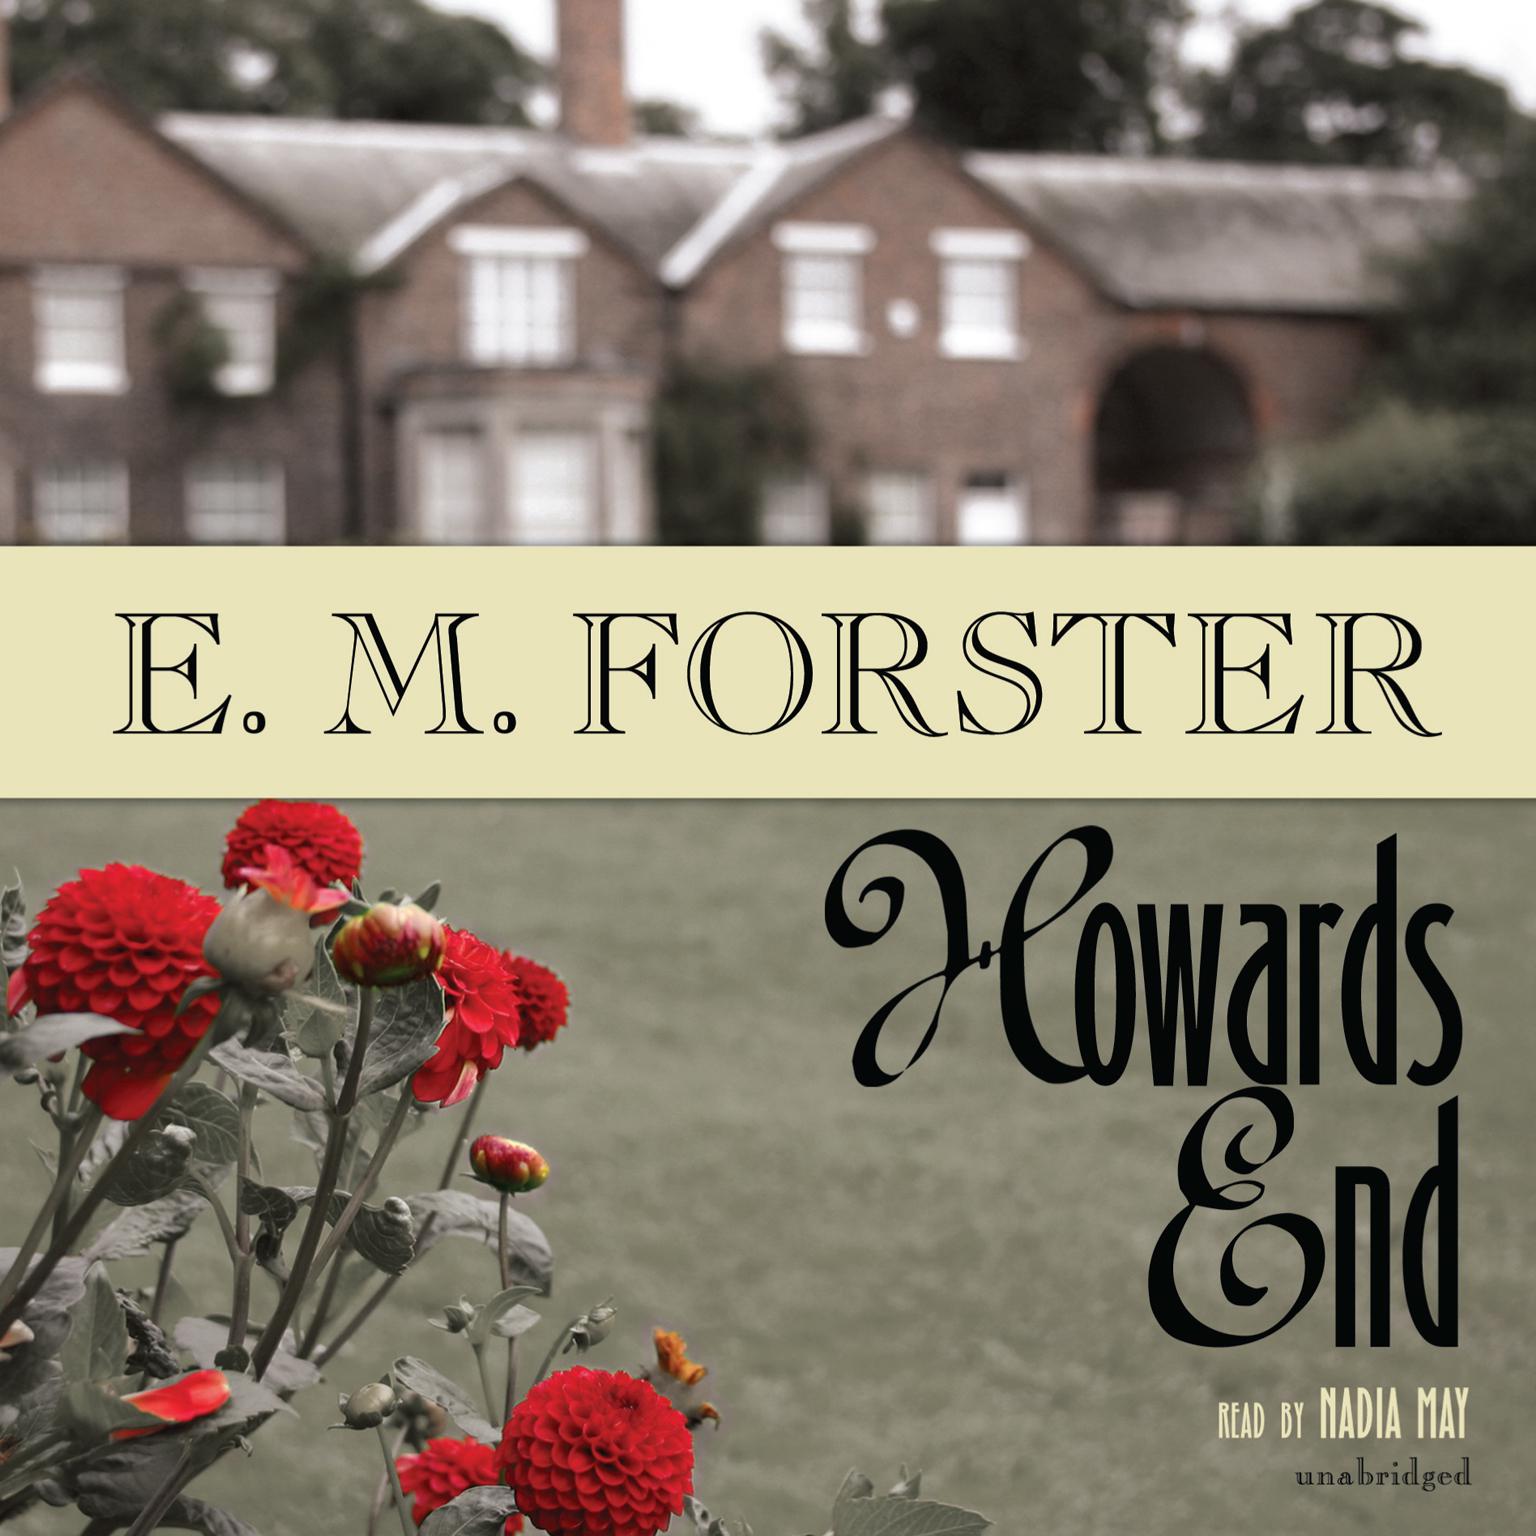 Howards End Audiobook, by E. M. Forster